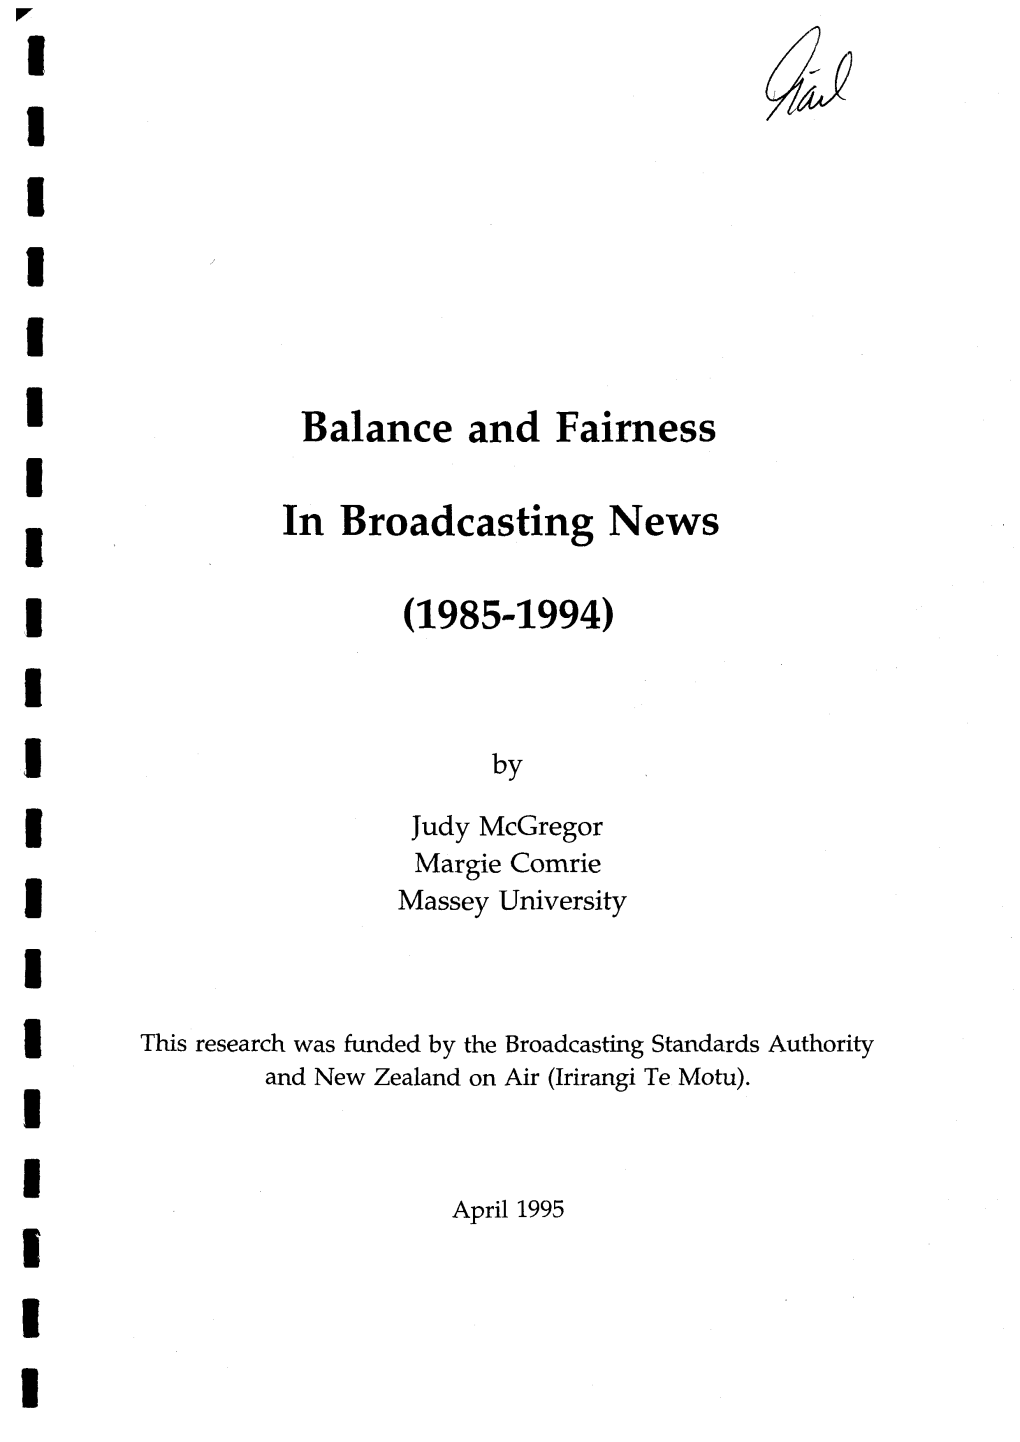 Balance and Fairness in Broadcasting News Is Expressed in Negative Terms, As Bias